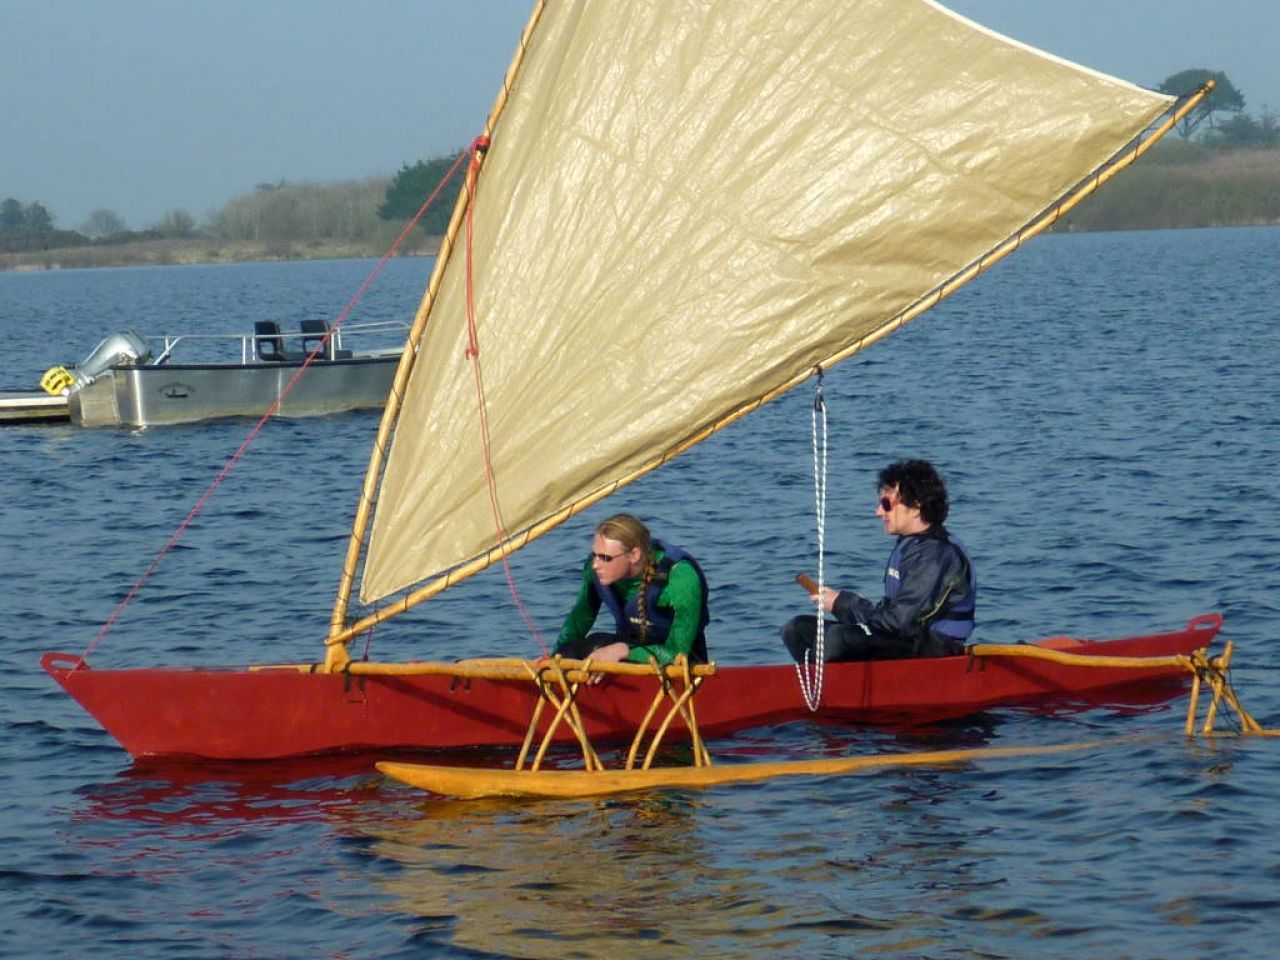 Small red outrigger canoe with crabclaw sail, two crew aboard